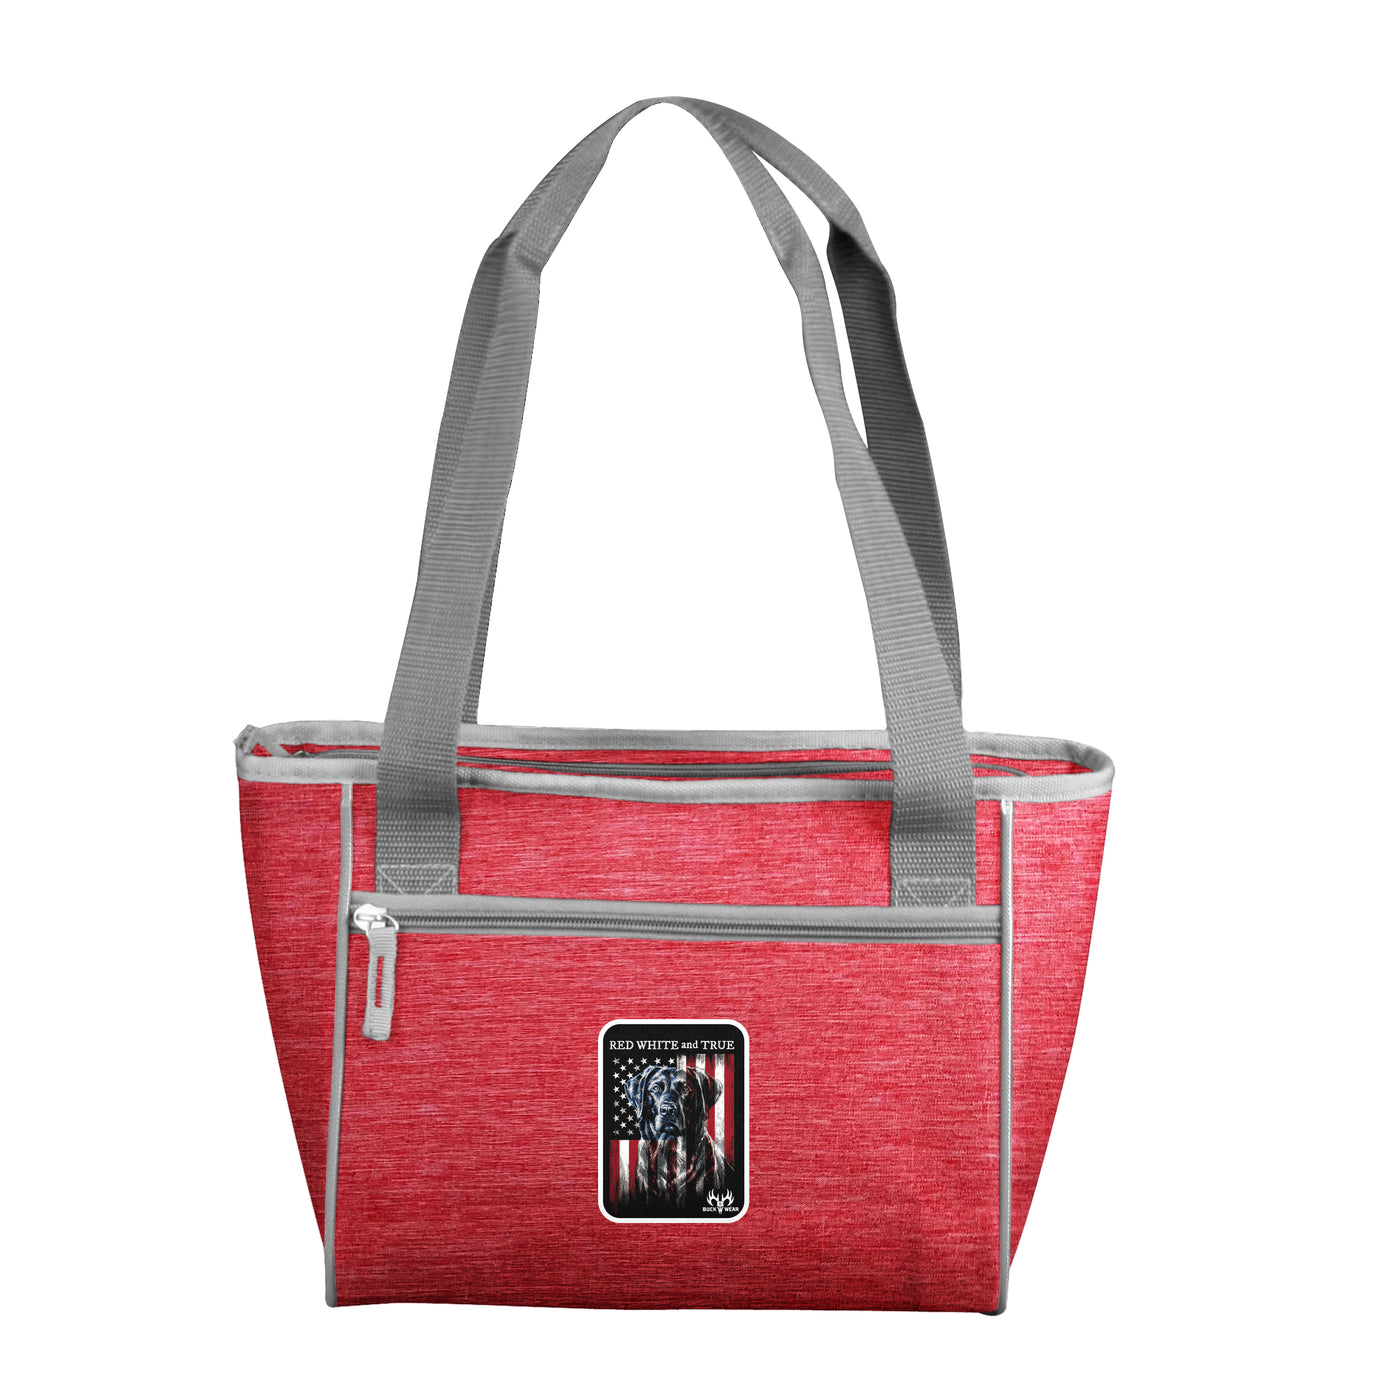 True Dog 16 Can Cooler Tote